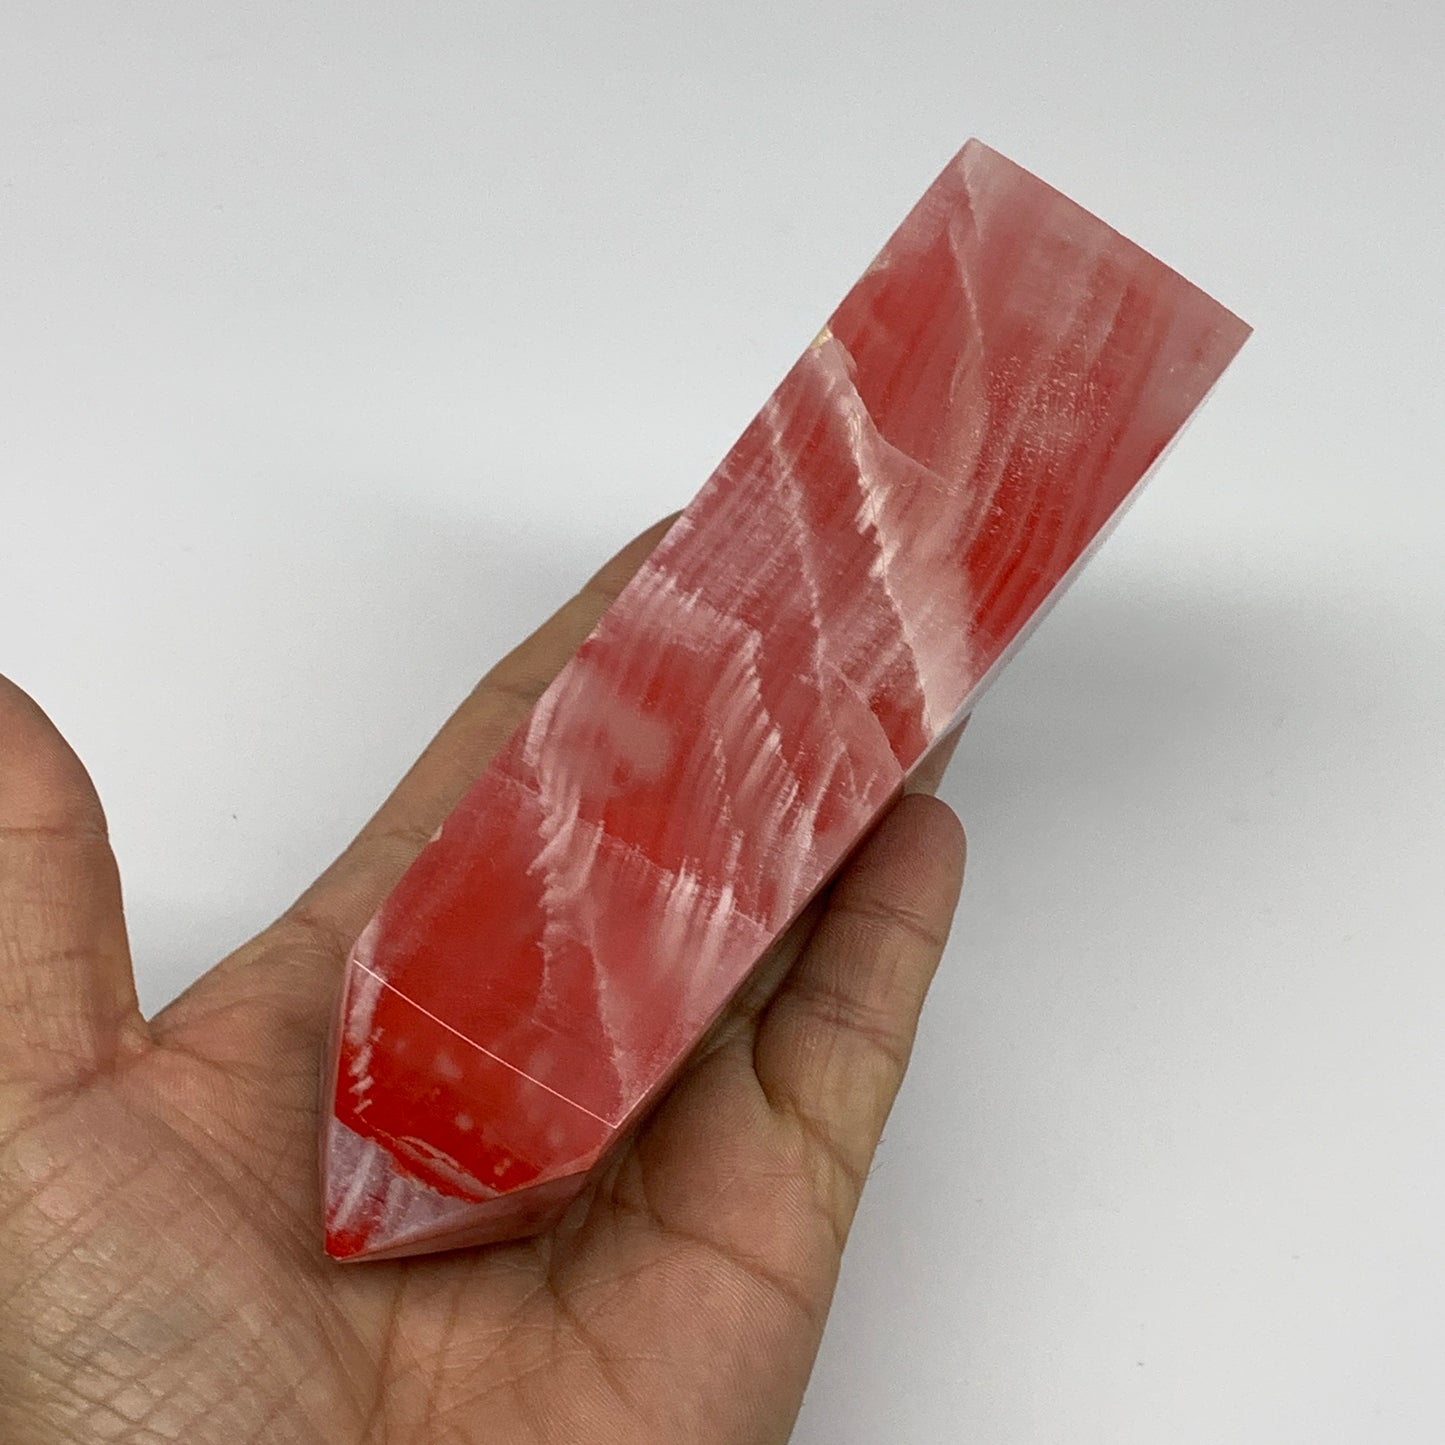 484.7g, 5.9"x1.6"x1.7" Dyed/Heated Calcite Point Tower Obelisk Crystal, B24982